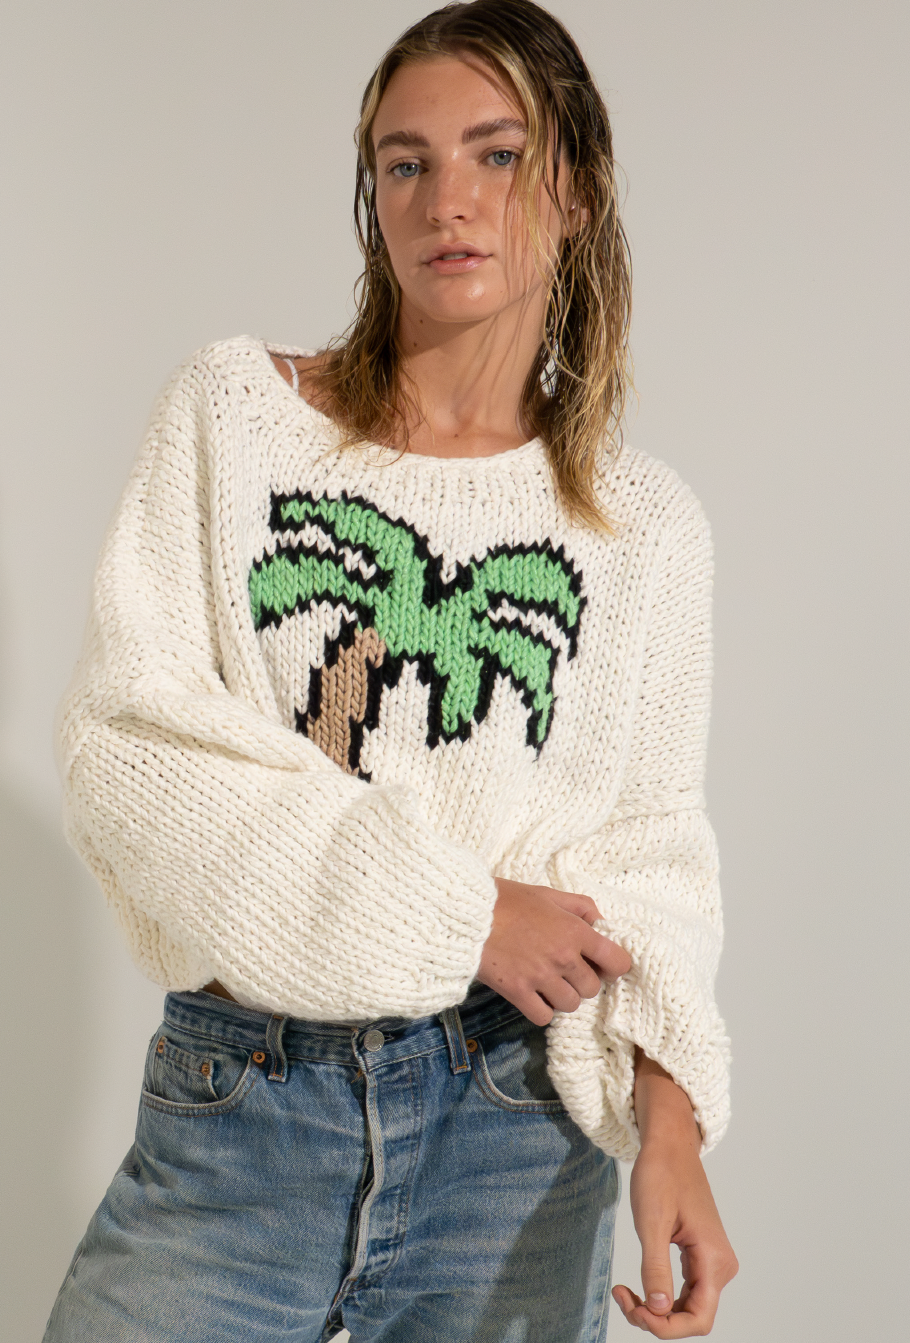 Chunky Cotton Palm Tree Pullover